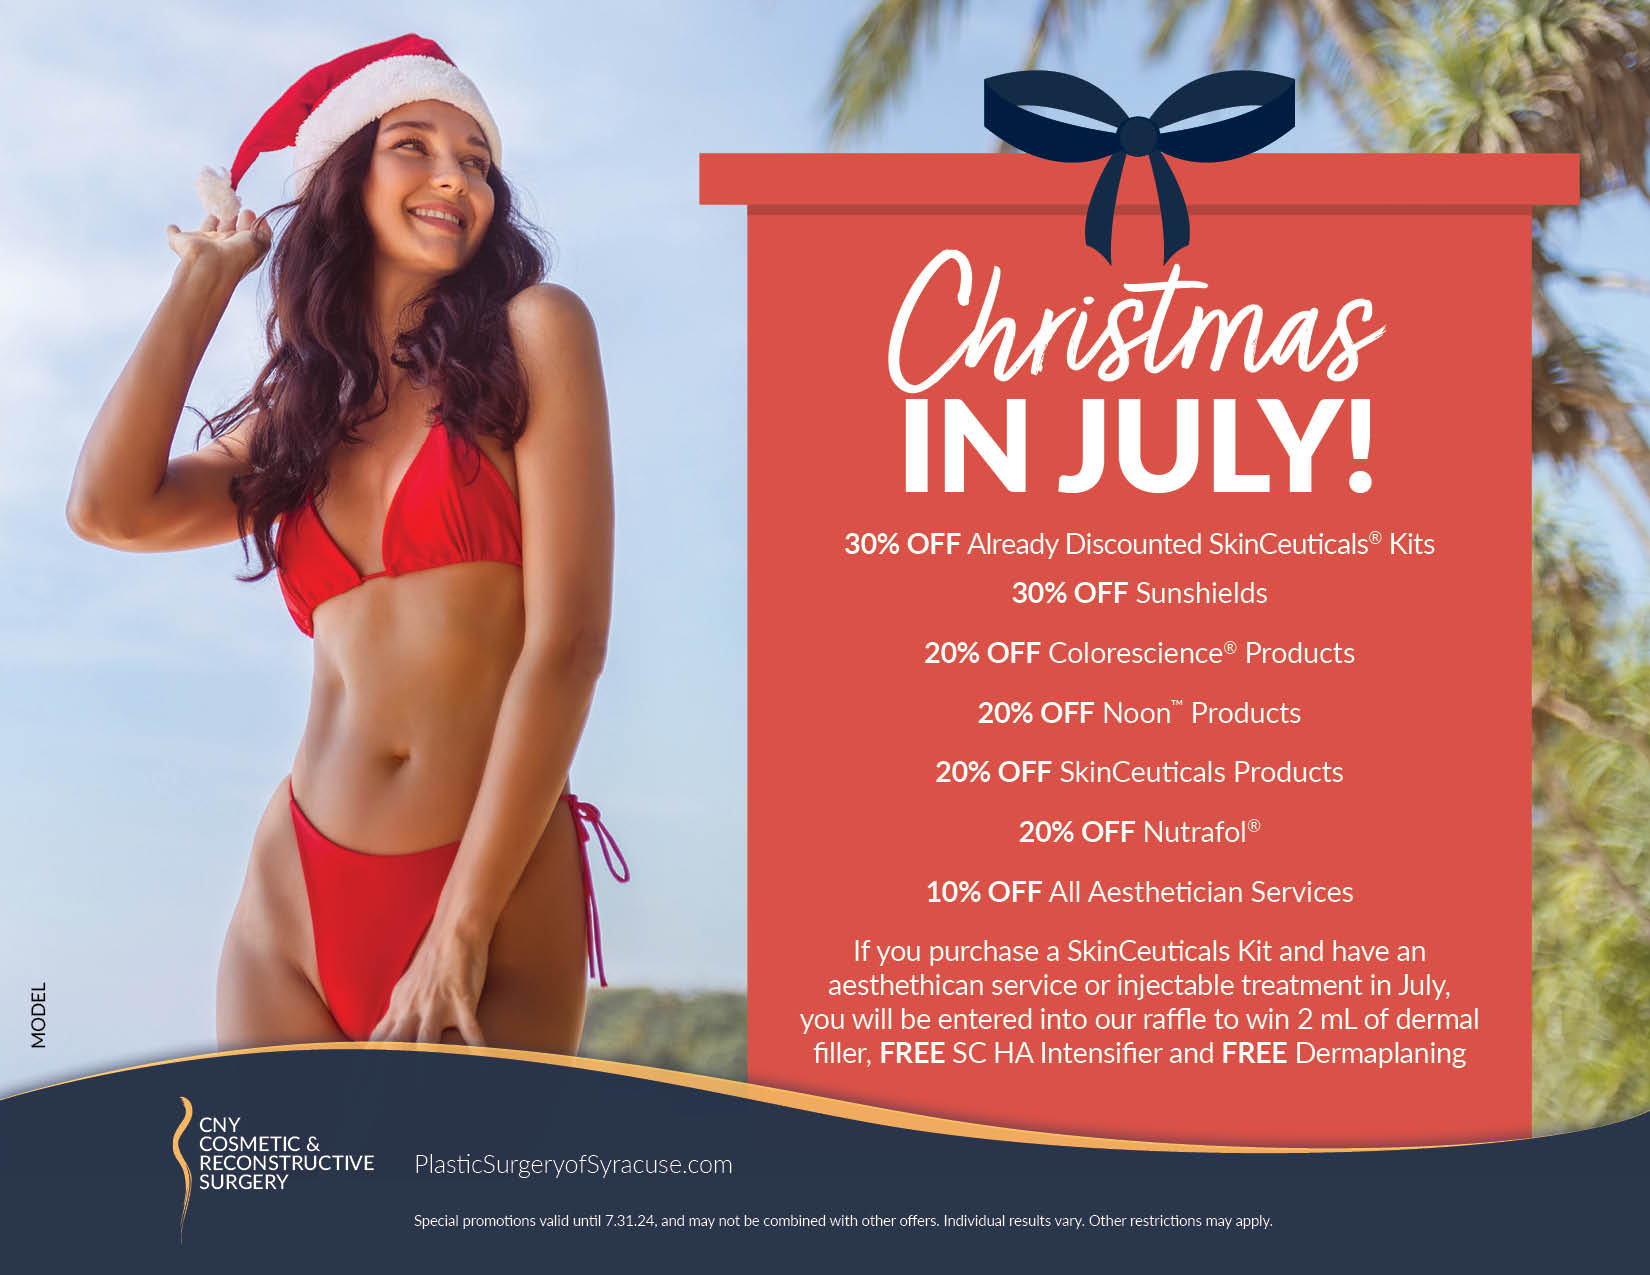 Christmas IN JULY! 30% OFF Already Discounted SkinCeuticals® Kits 30% OFF Sunshields 20% OFF Colorescience® Products 20% OFF Noon™ Products 20% OFF SkinCeuticals Products 20% OFF Nutrafol® 10% OFF All Aesthetician Services If you purchase a SkinCeuticals Kit and have an aesthethican service or injectable treatment in July, you will be entered into our raffle to win 2 mL of dermal filler, FREE SC HA Intensifier and FREE Dermaplaning